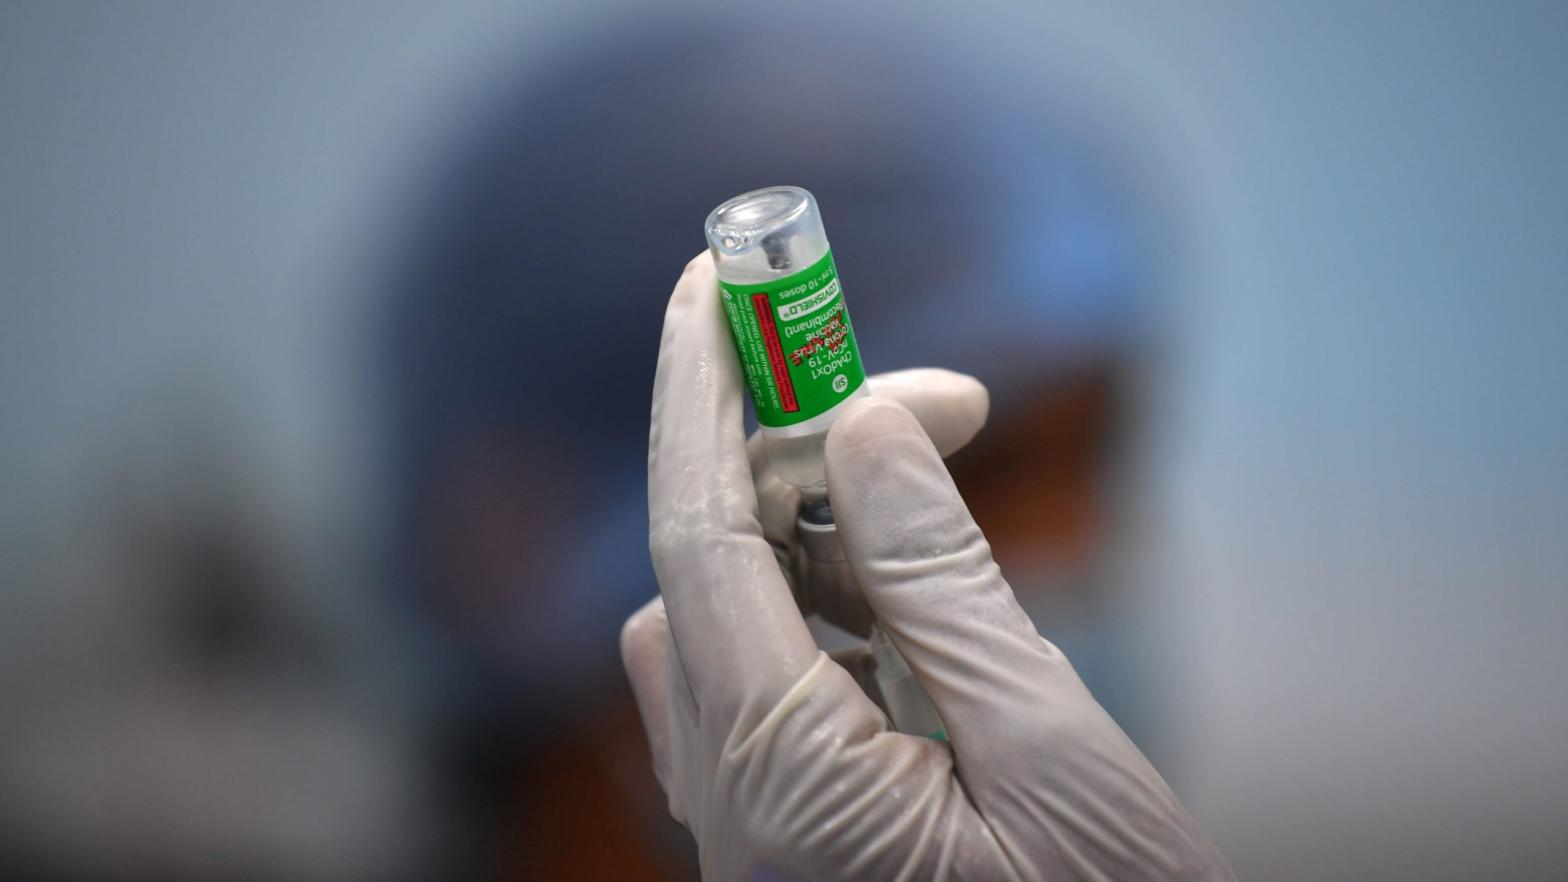 A staff member of the Rajawadi Hospital in India holds a vial of Covishield, AstraZeneca's Covid-19 coronavirus vaccine made by India's Serum Institute.  (Photo: Indranil Mukherjee, Getty Images)